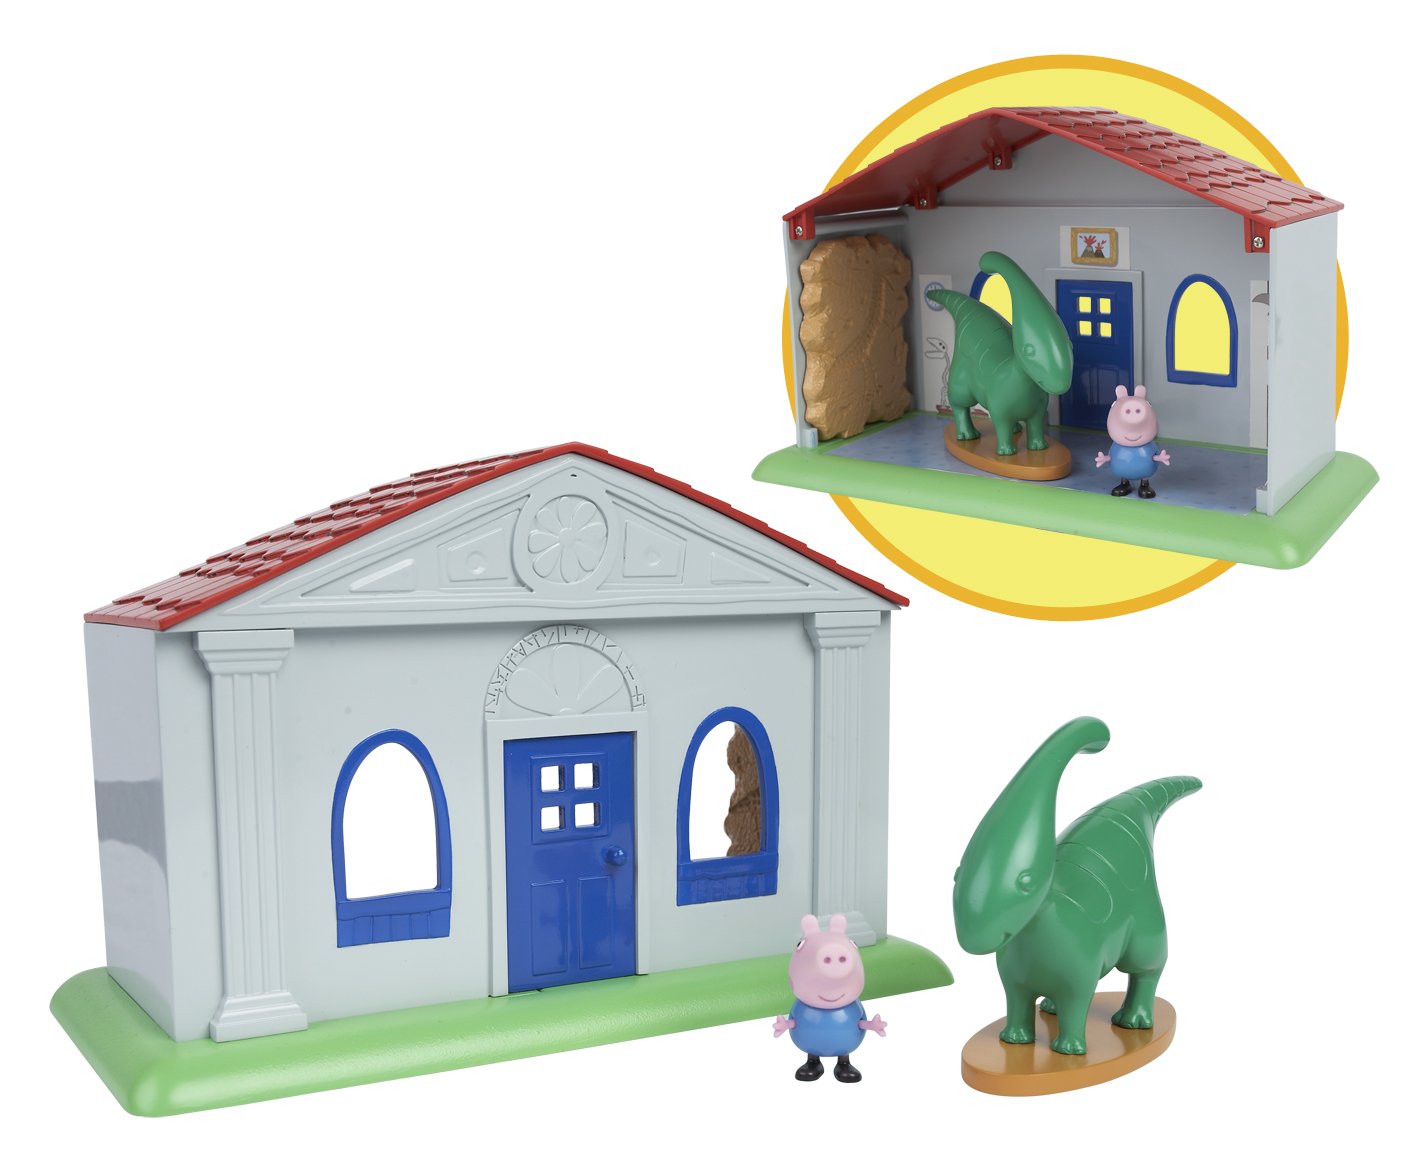 Peppa Pig s Funtime Playset - Museum